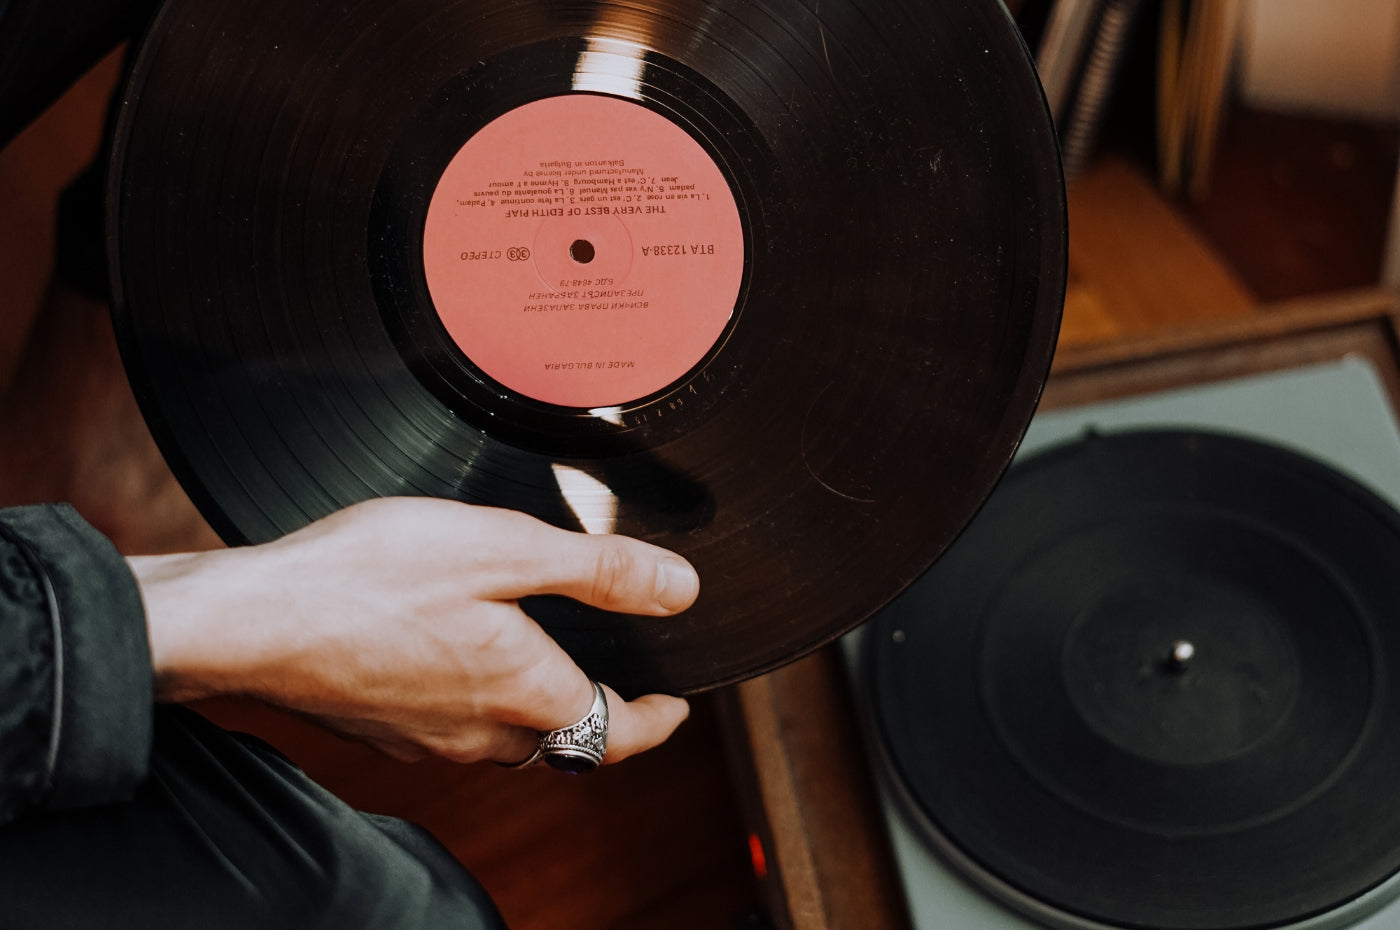 How to clean vinyl records - safely, quickly & effectively